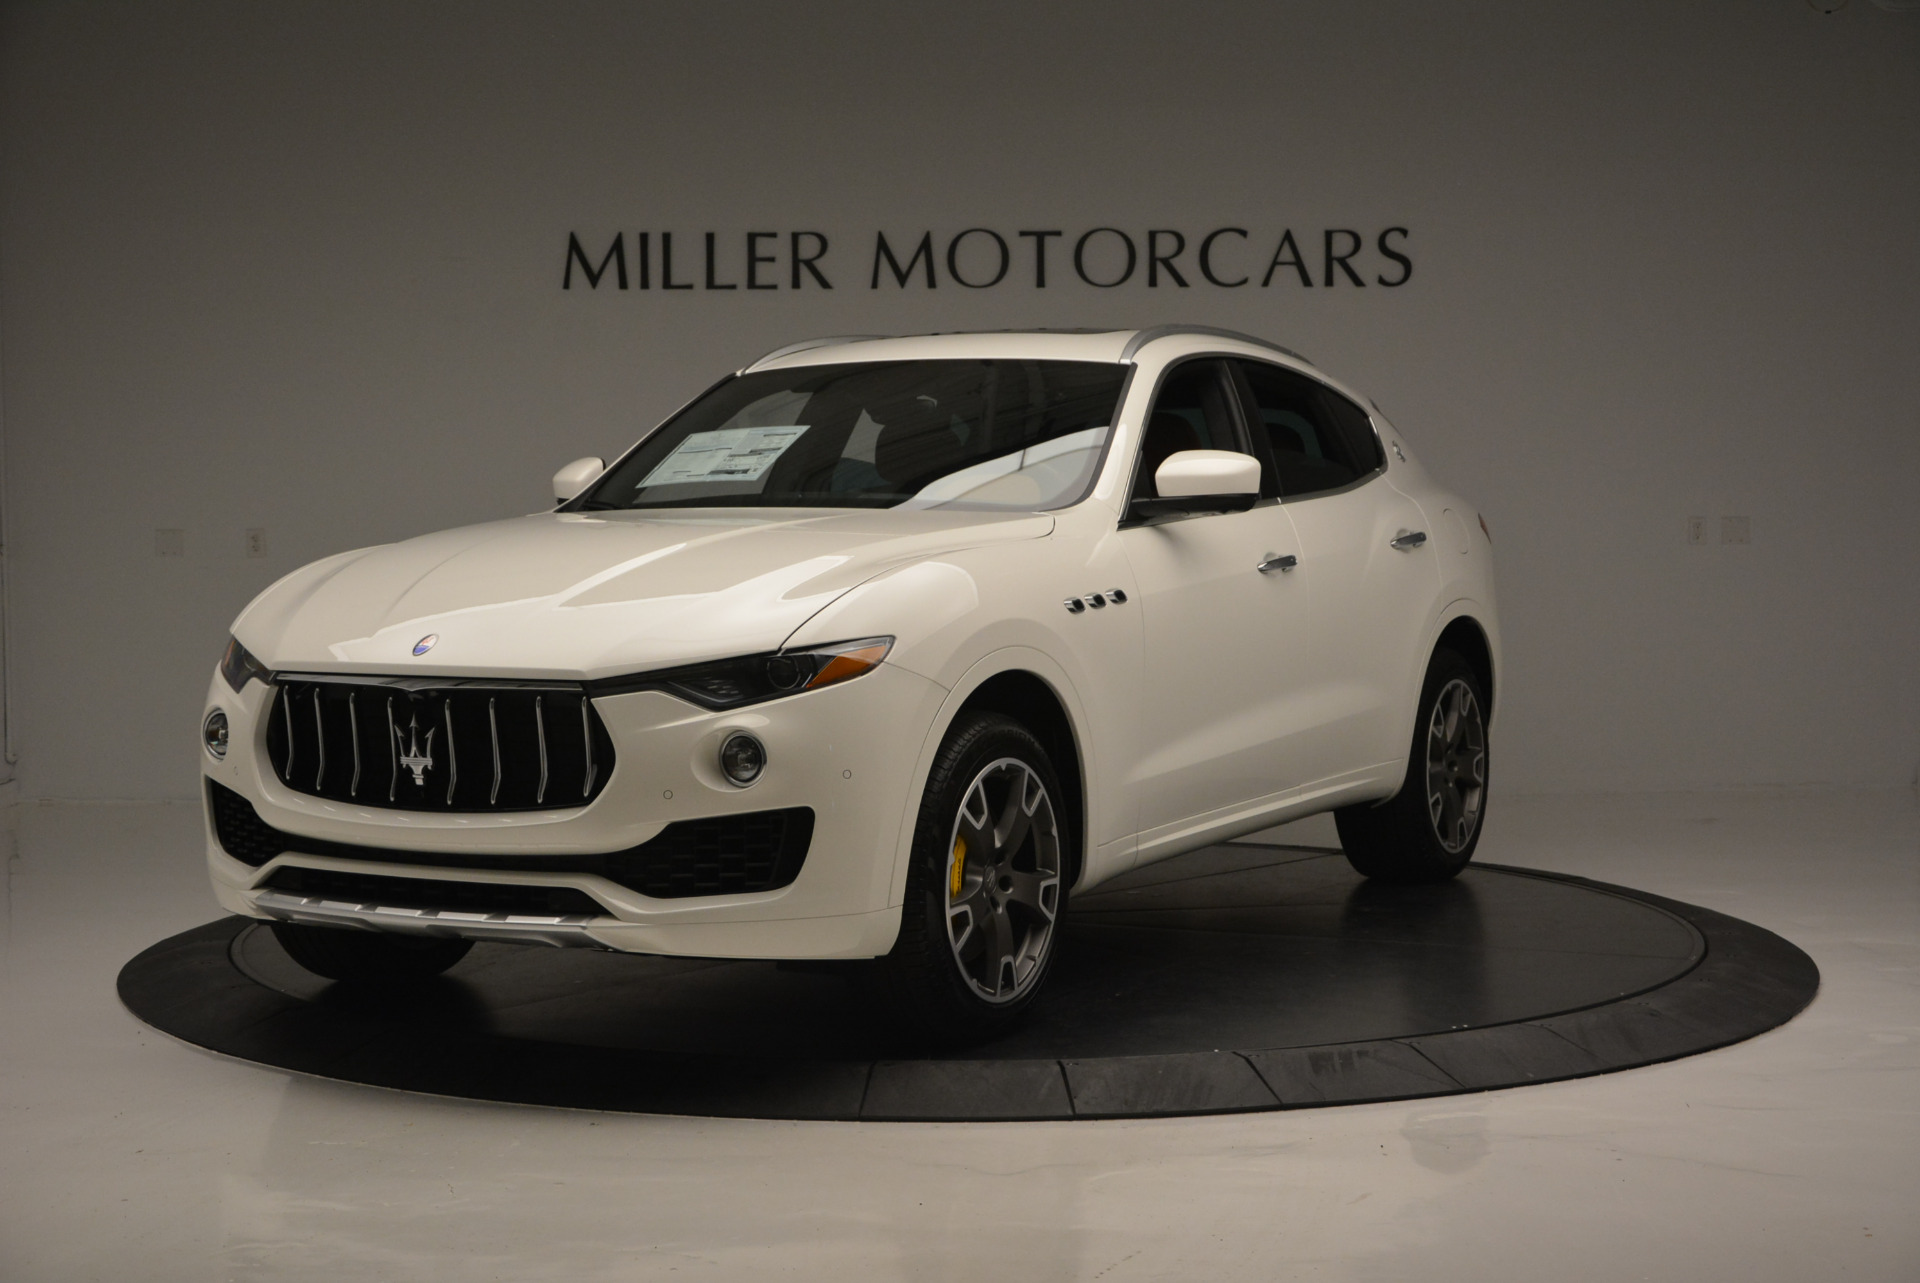 New 2017 Maserati Levante S for sale Sold at Pagani of Greenwich in Greenwich CT 06830 1